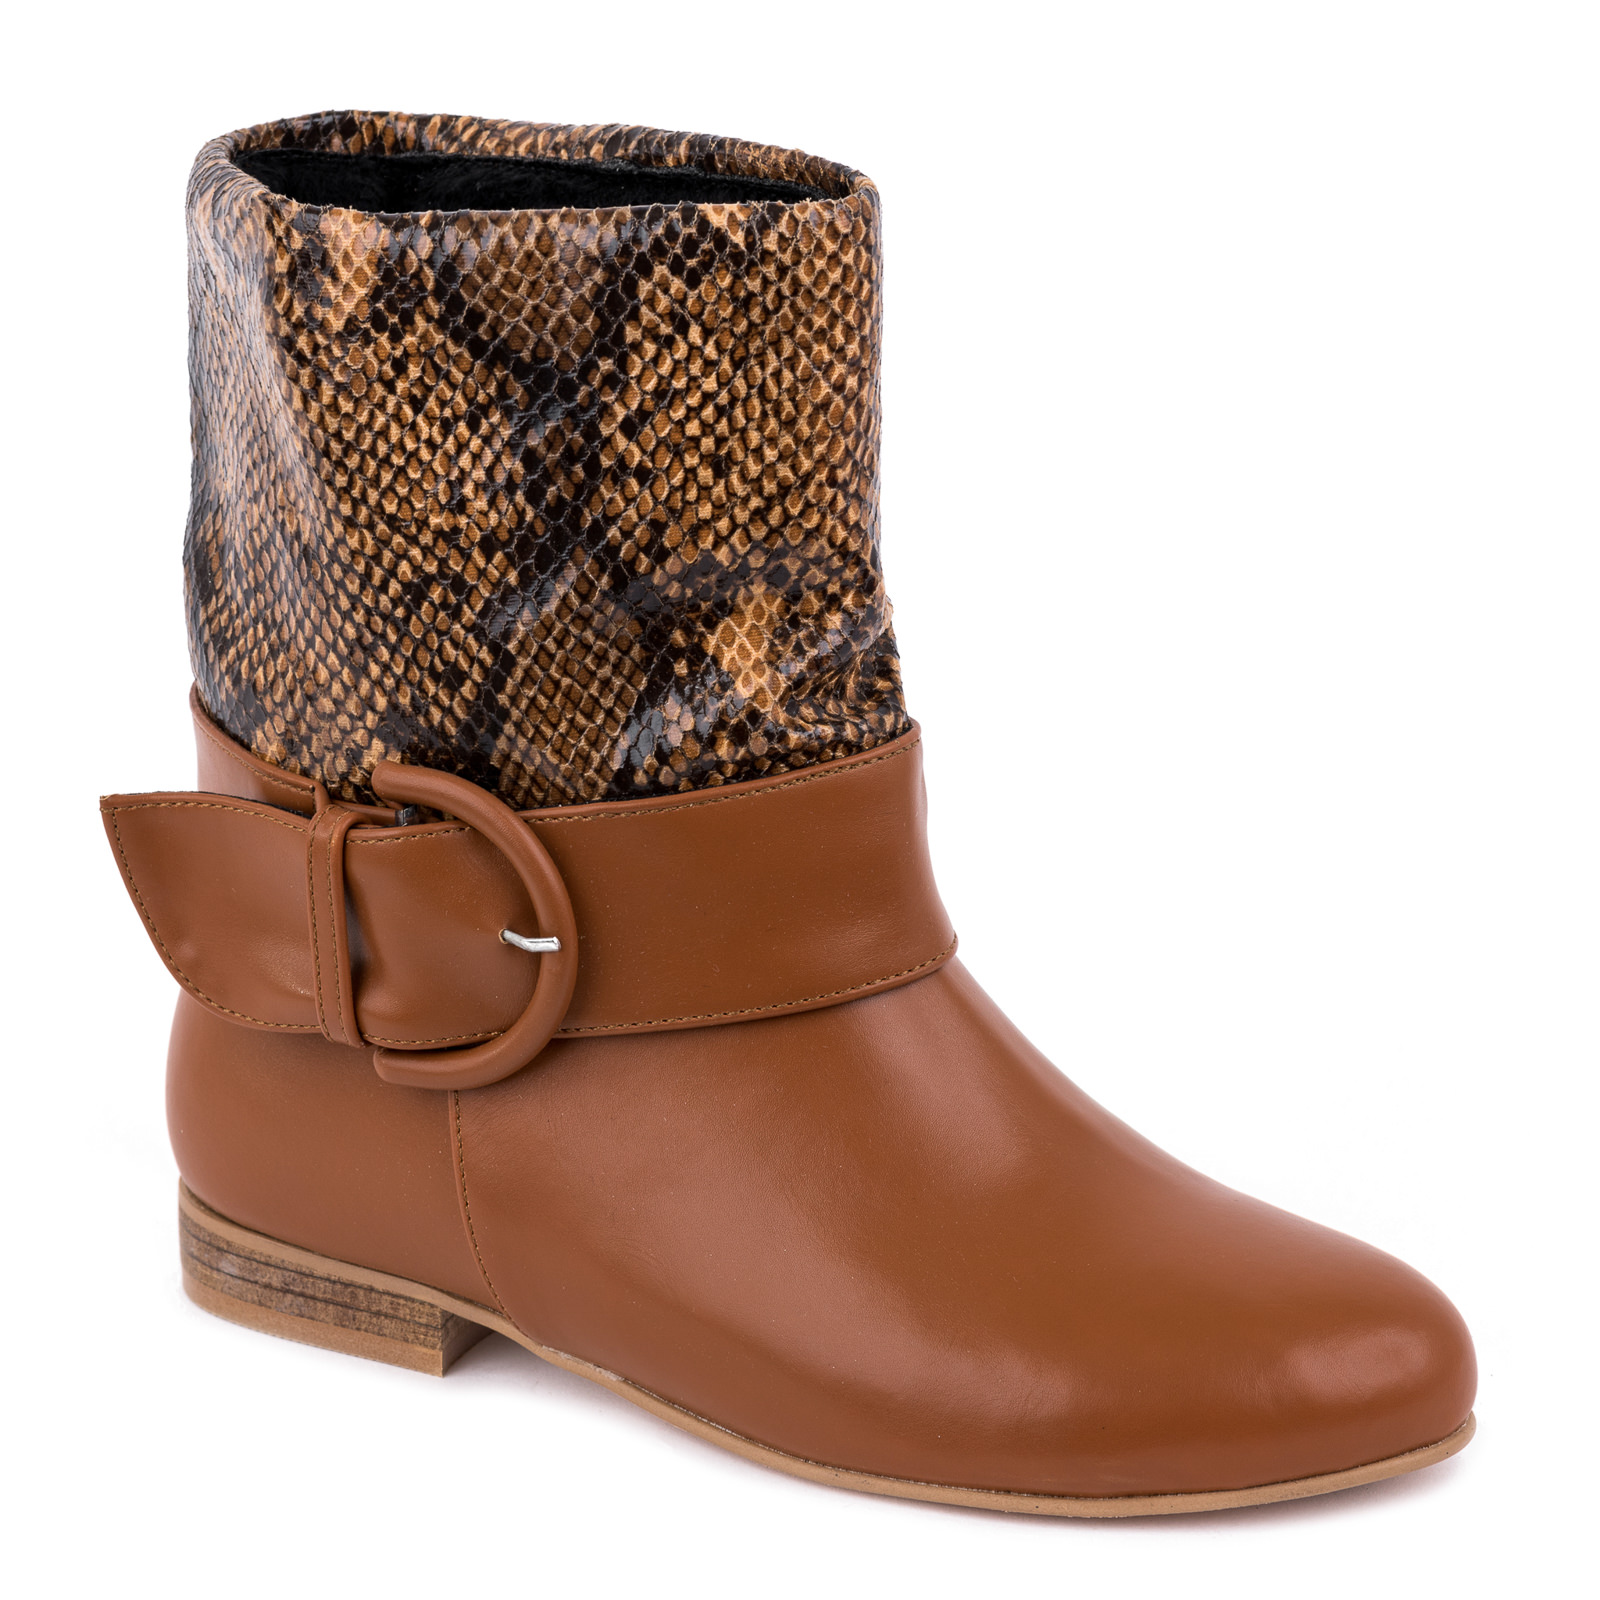 SNAKE PRINT FLAT ANKLE BOOTS WITH BELT - CAMEL